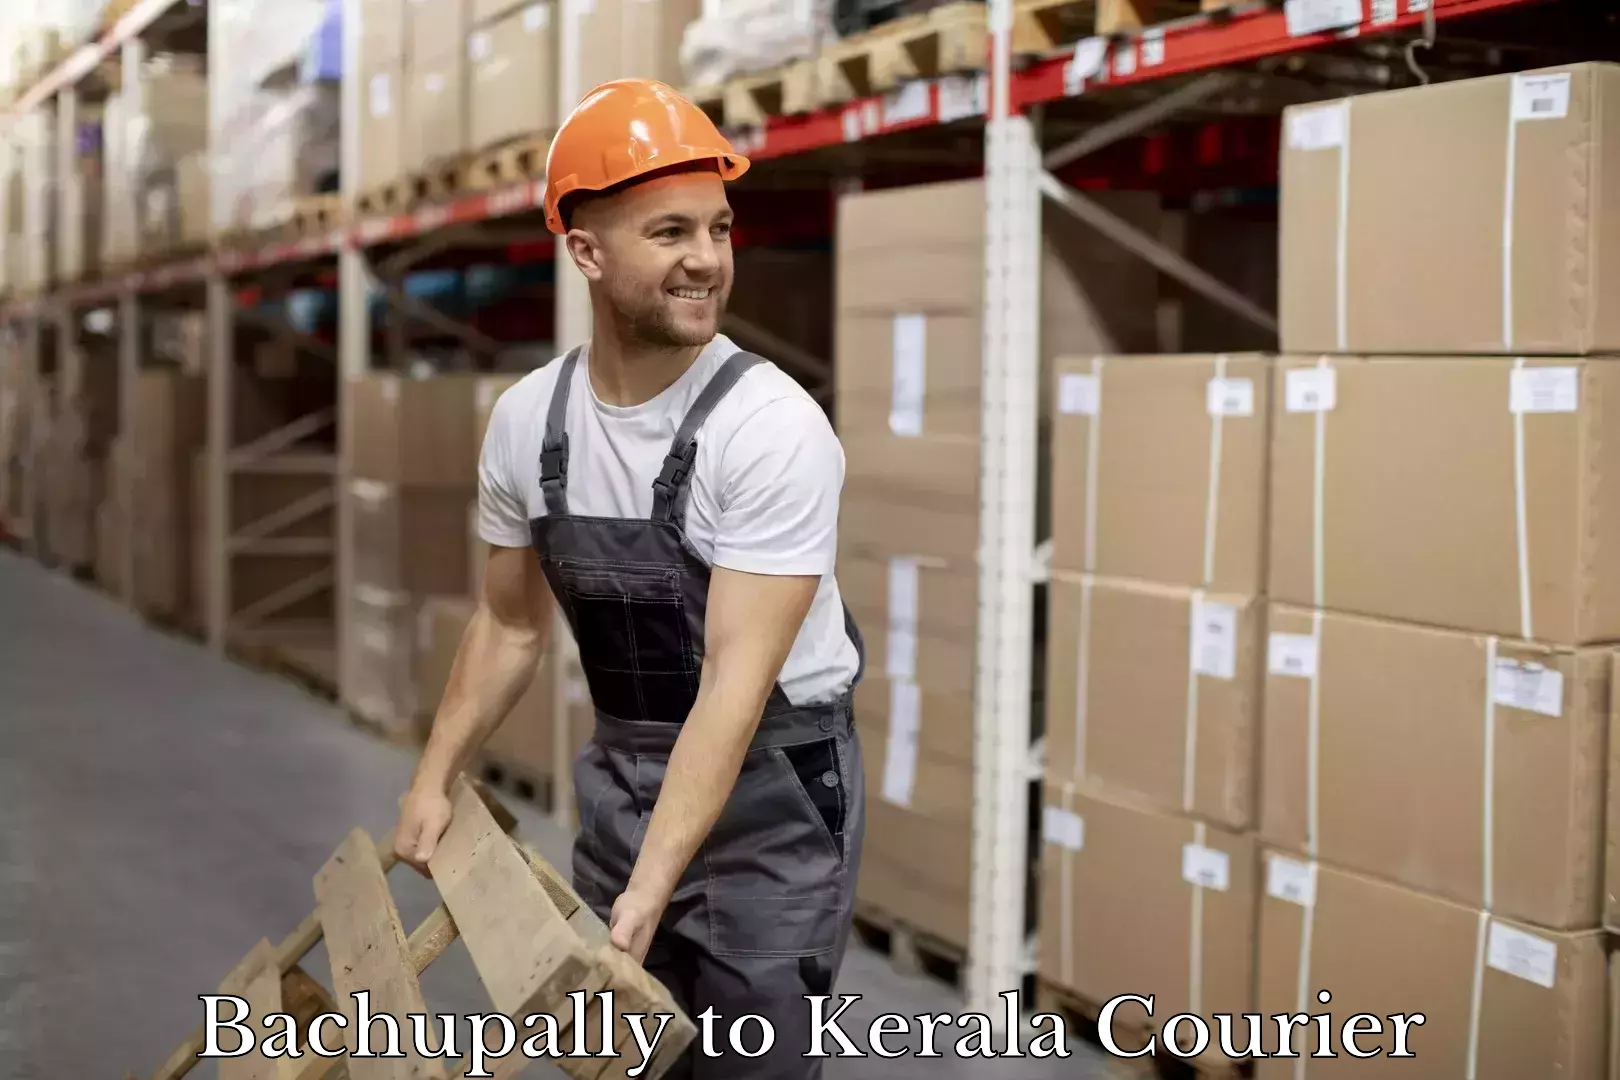 Reliable delivery network Bachupally to Kerala